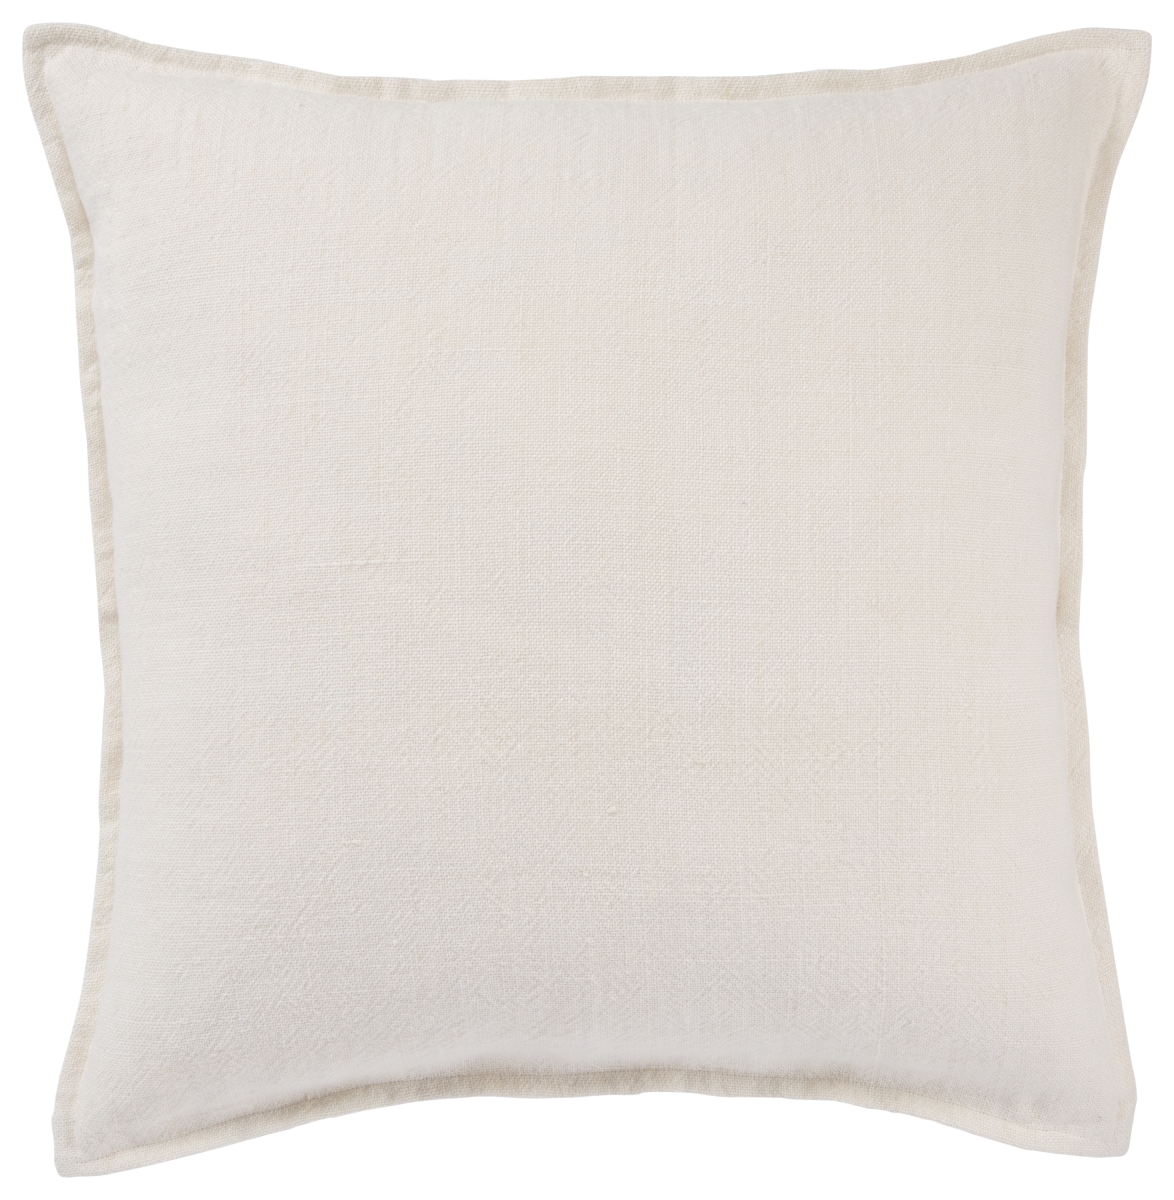 Plw103298 22 X 22 In. Burbank Blanche Solid Ivory Poly Throw Pillow